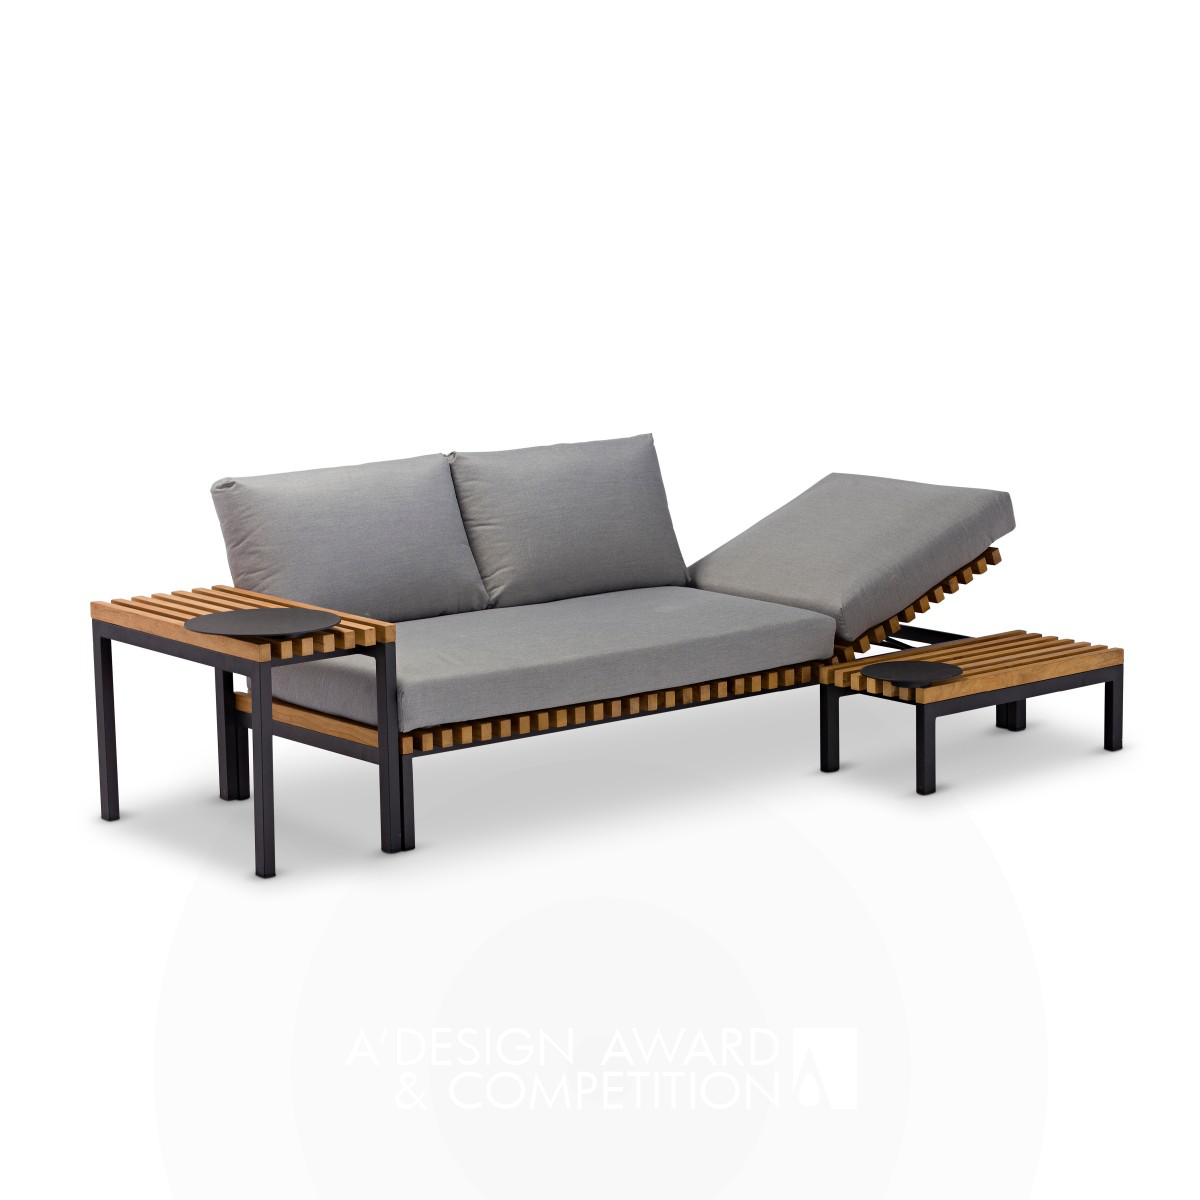 Fields Outdoor Sunlounger and Sofa